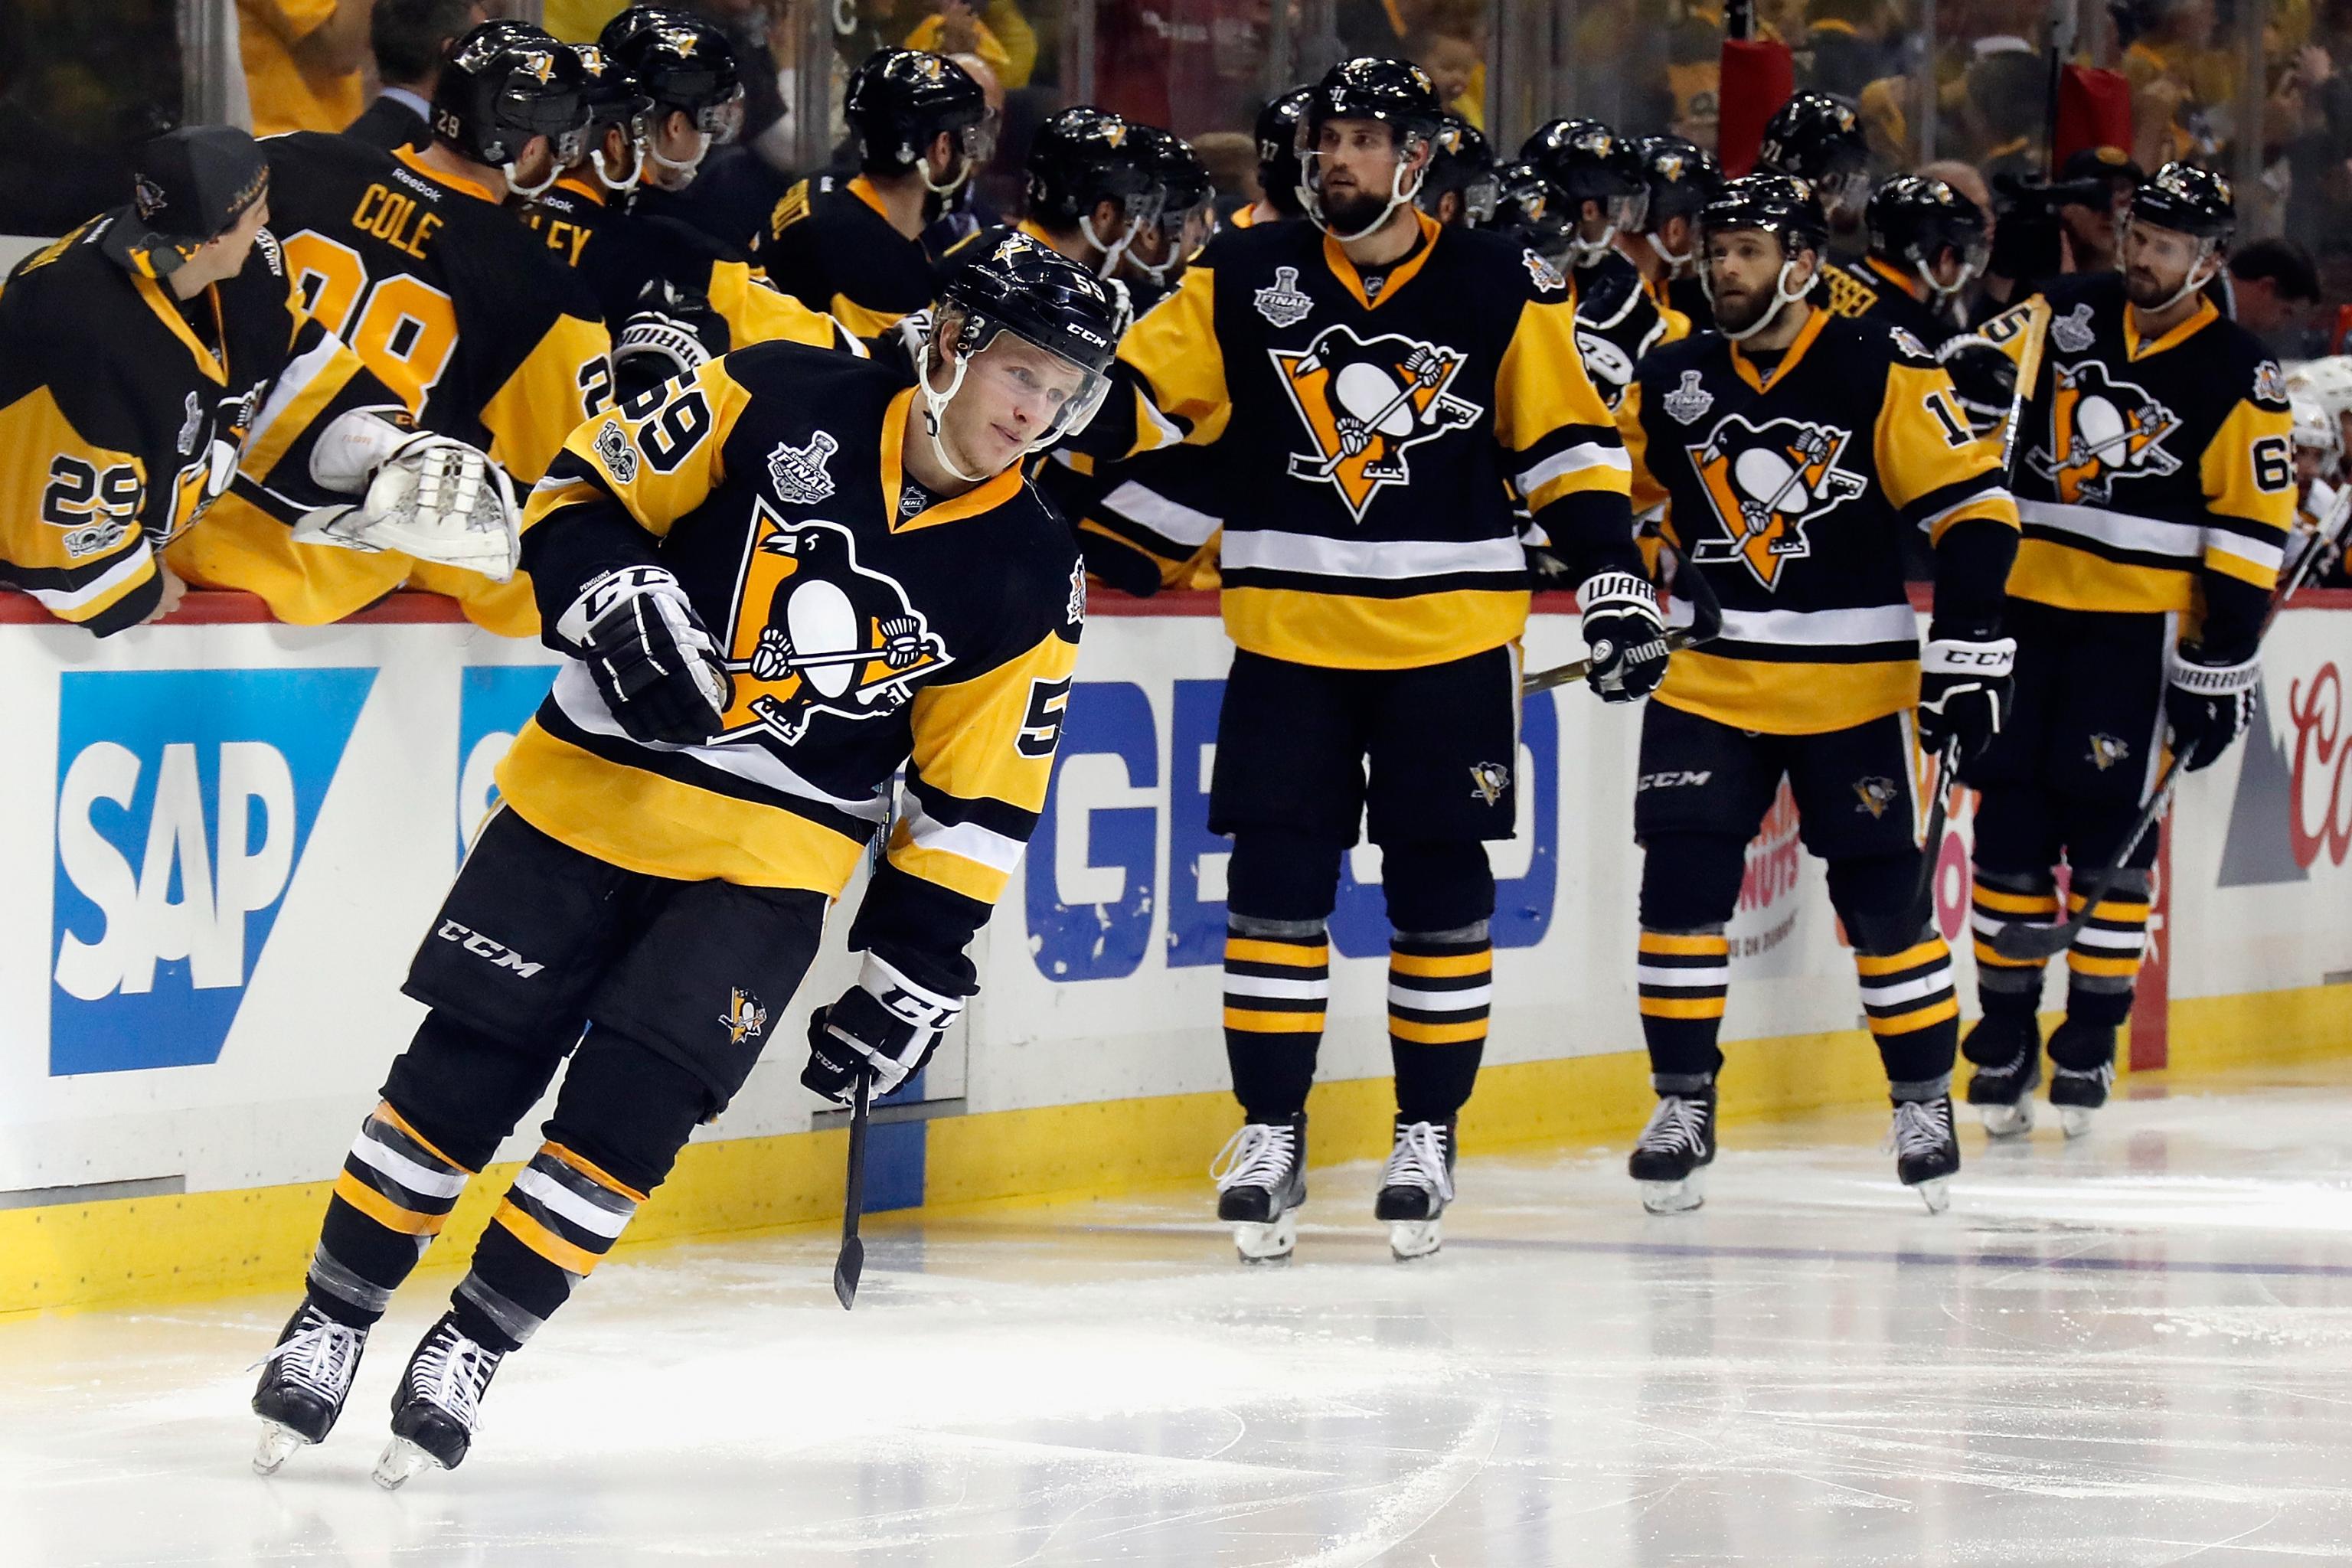 Jake Guentzel climbing record book for Pittsburgh Penguins – The Denver Post